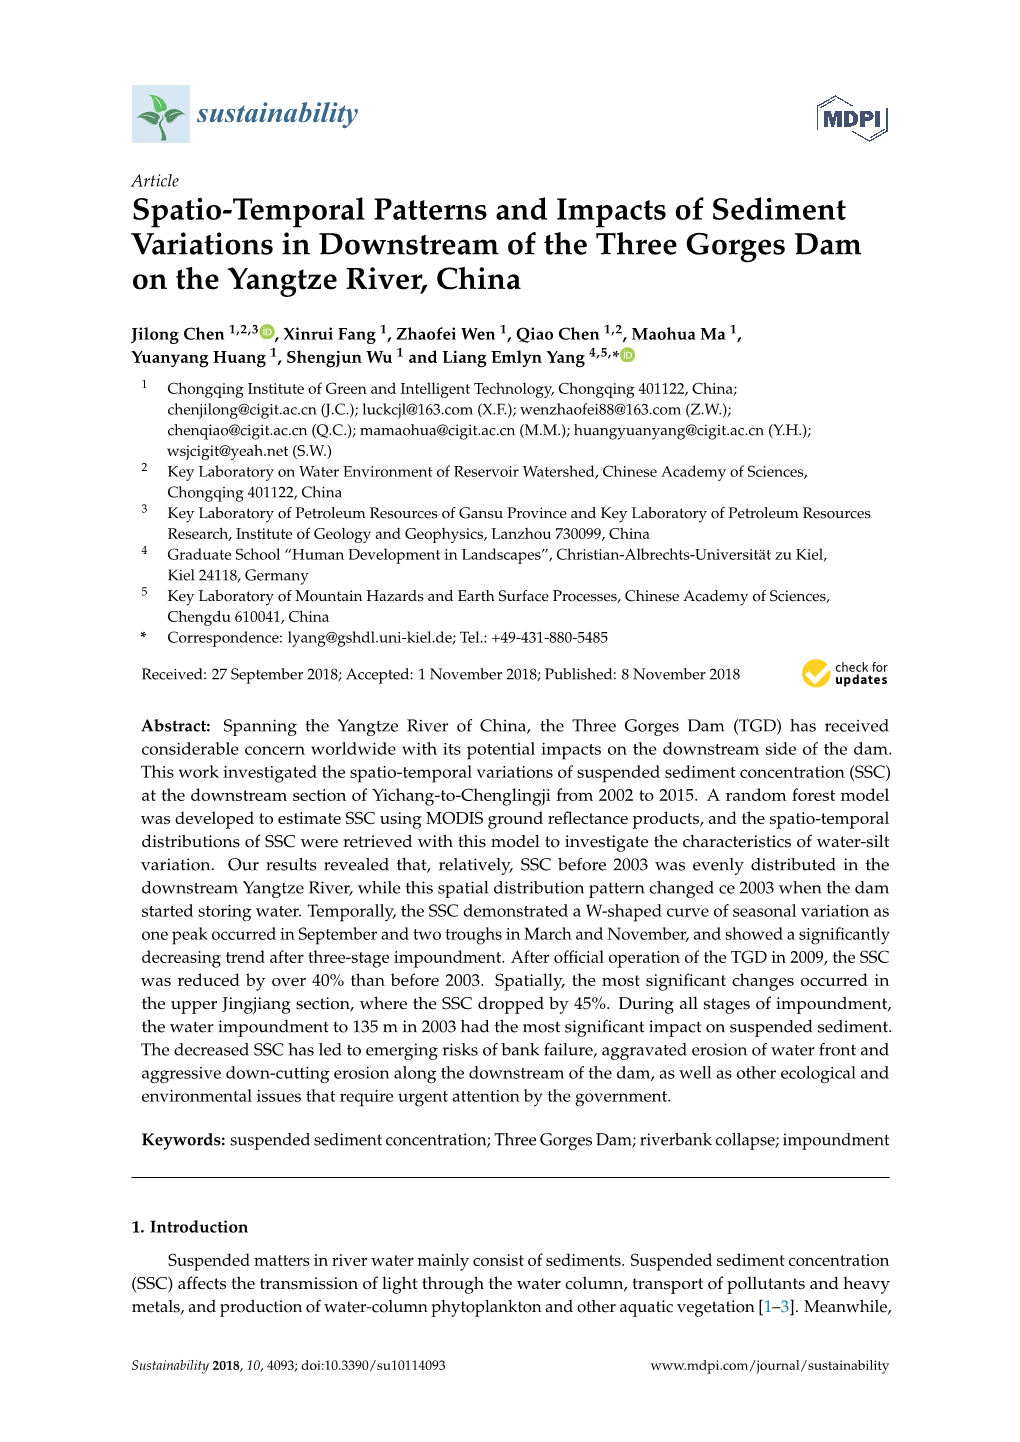 Spatio-Temporal Patterns and Impacts of Sediment Variations in Downstream of the Three Gorges Dam on the Yangtze River, China